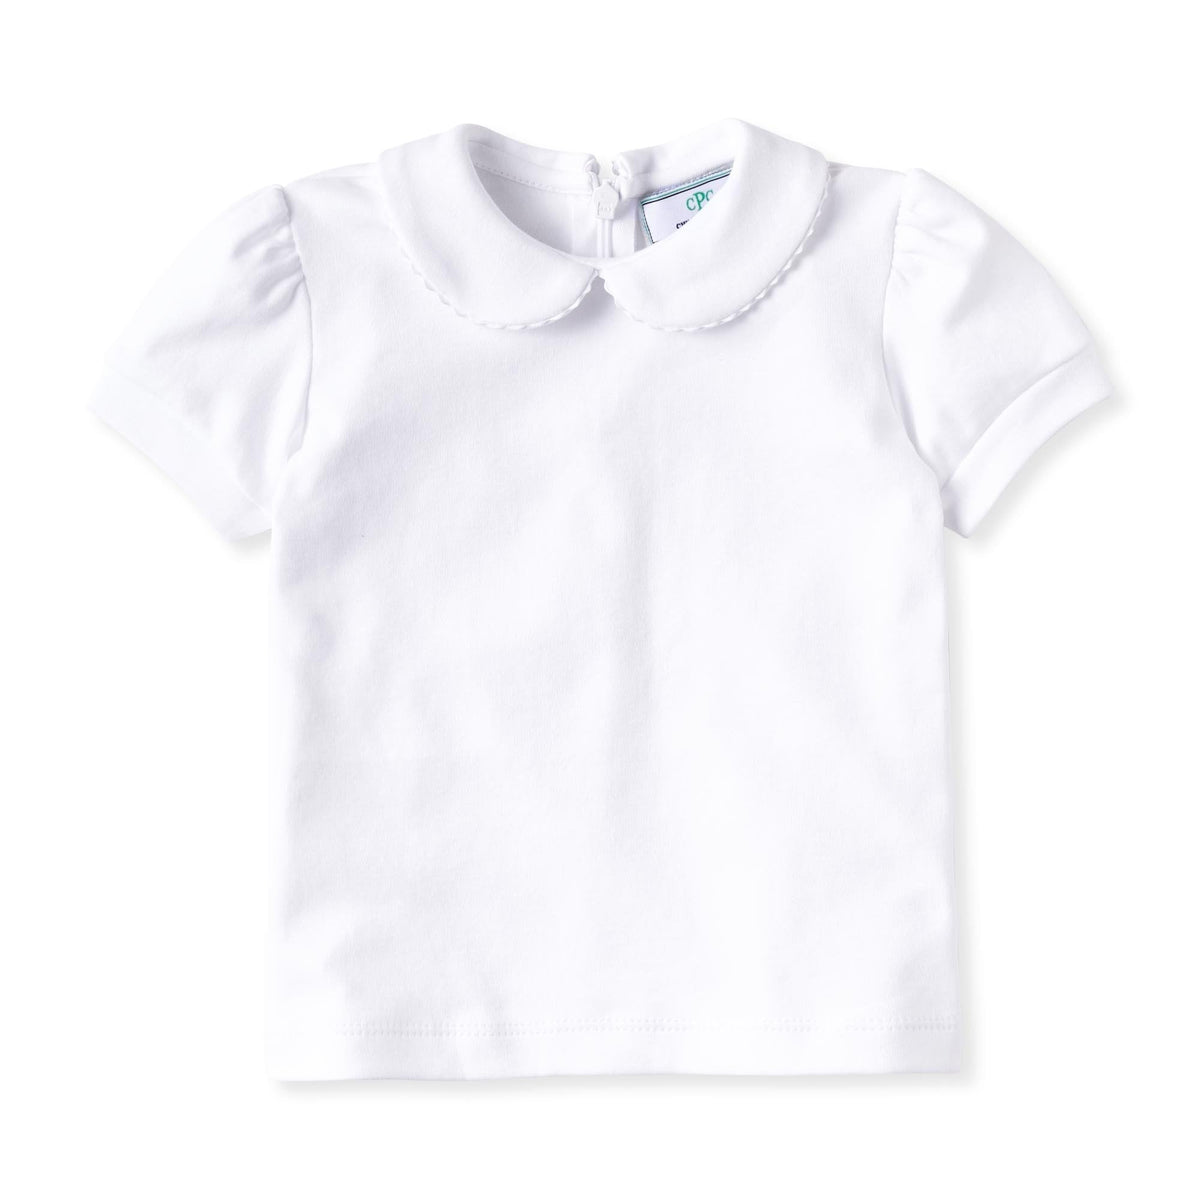 Classic and Preppy Isabelle Short Sleeve Peter Pan Shirt, White Ric Rac-Shirts and Tops-Bright White with White Ric Rac-2T-CPC - Classic Prep Childrenswear